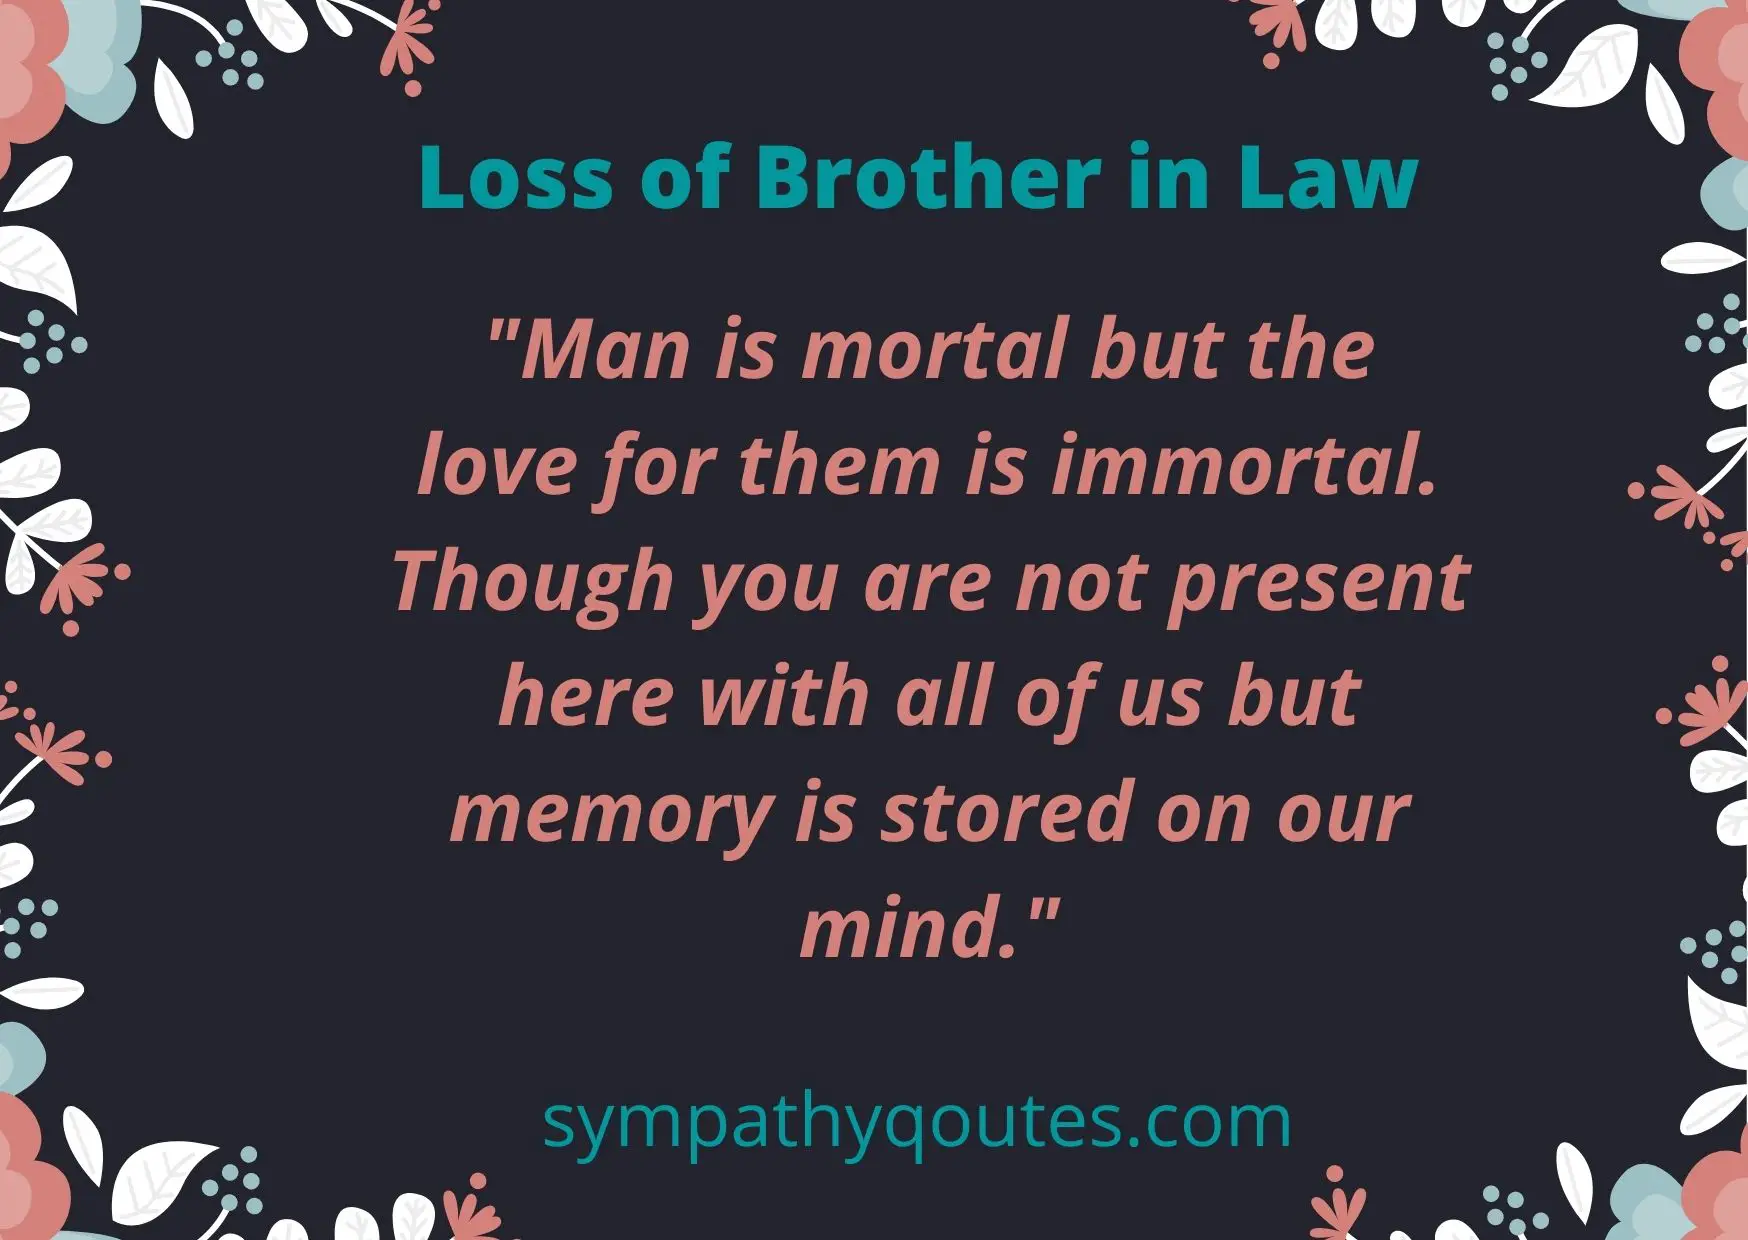  Sympathy Quotes for Loss of Brother in Law